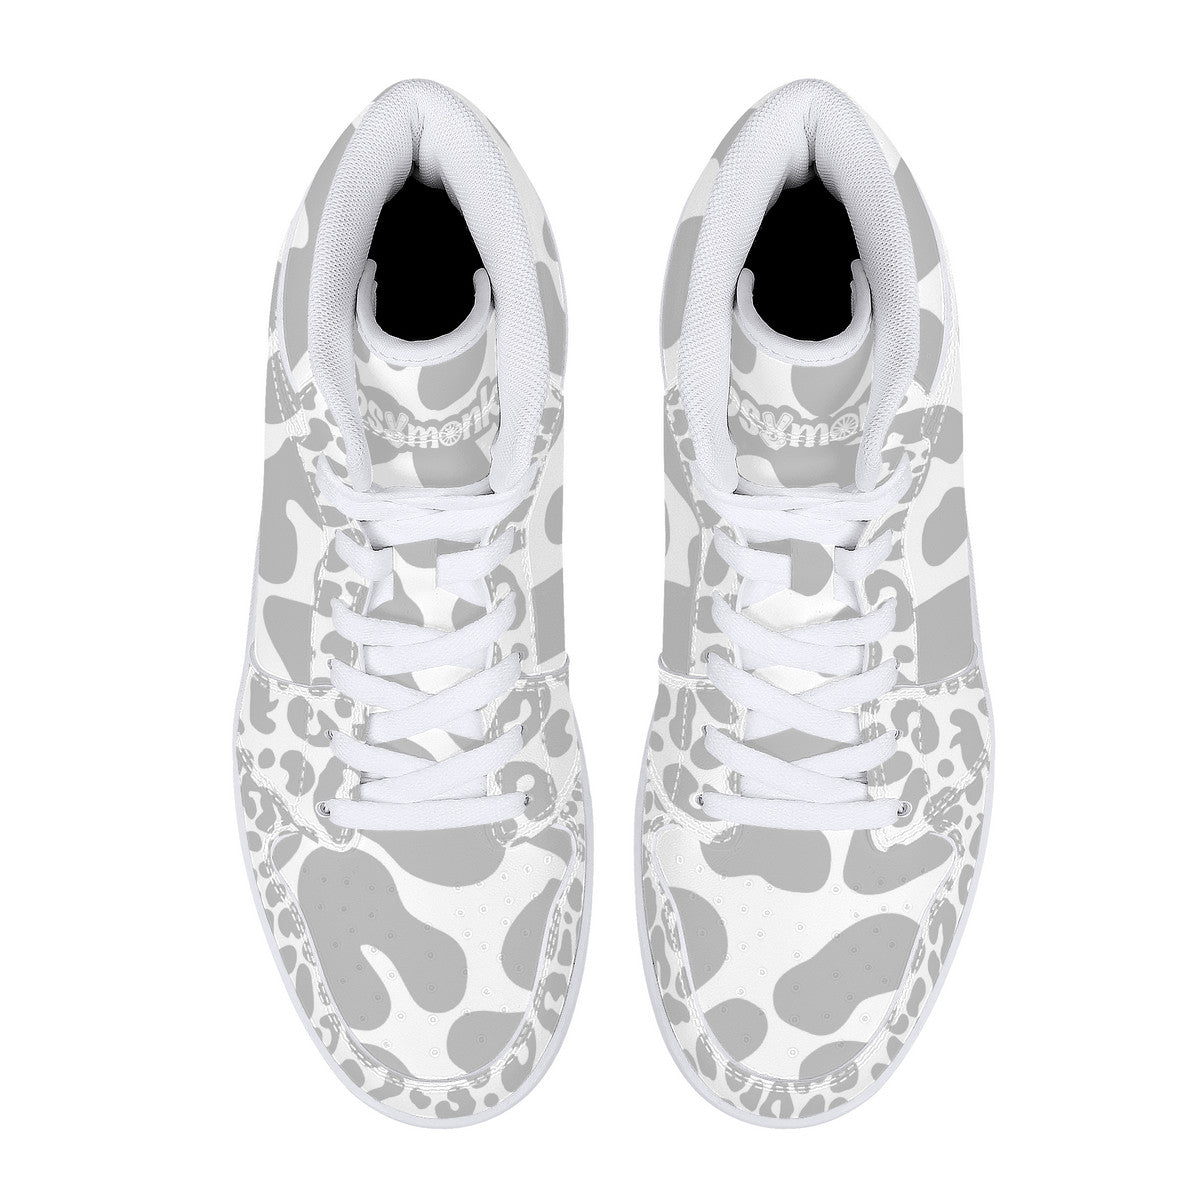 "Nix Leopard" High-Top Synthetic Leather Sneakers